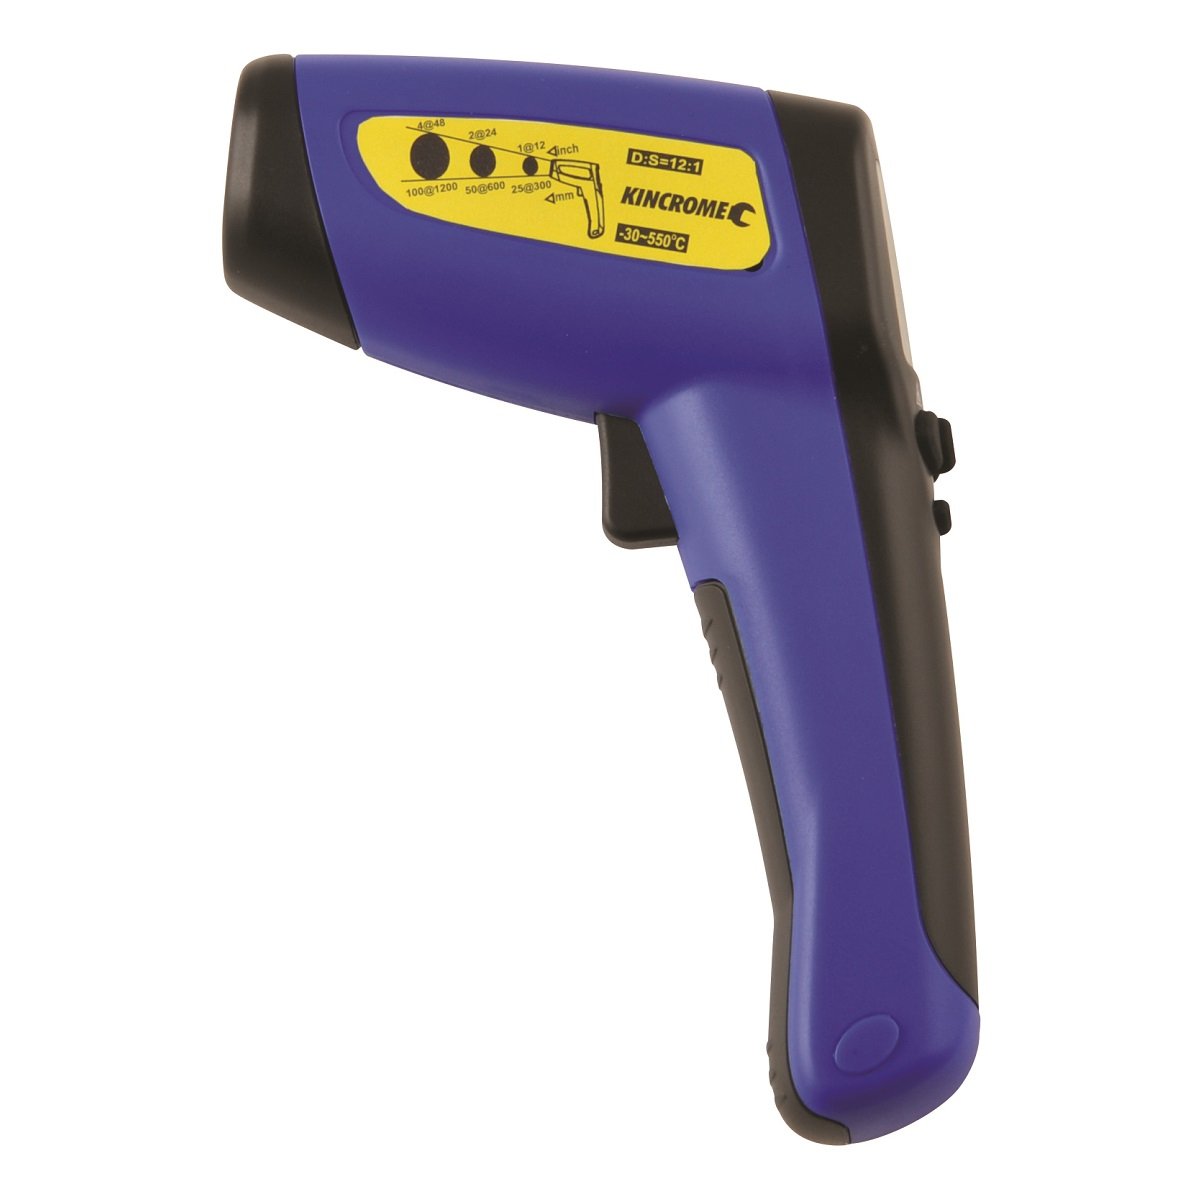 Kincrome Non Contact Infrared Thermometer K11110